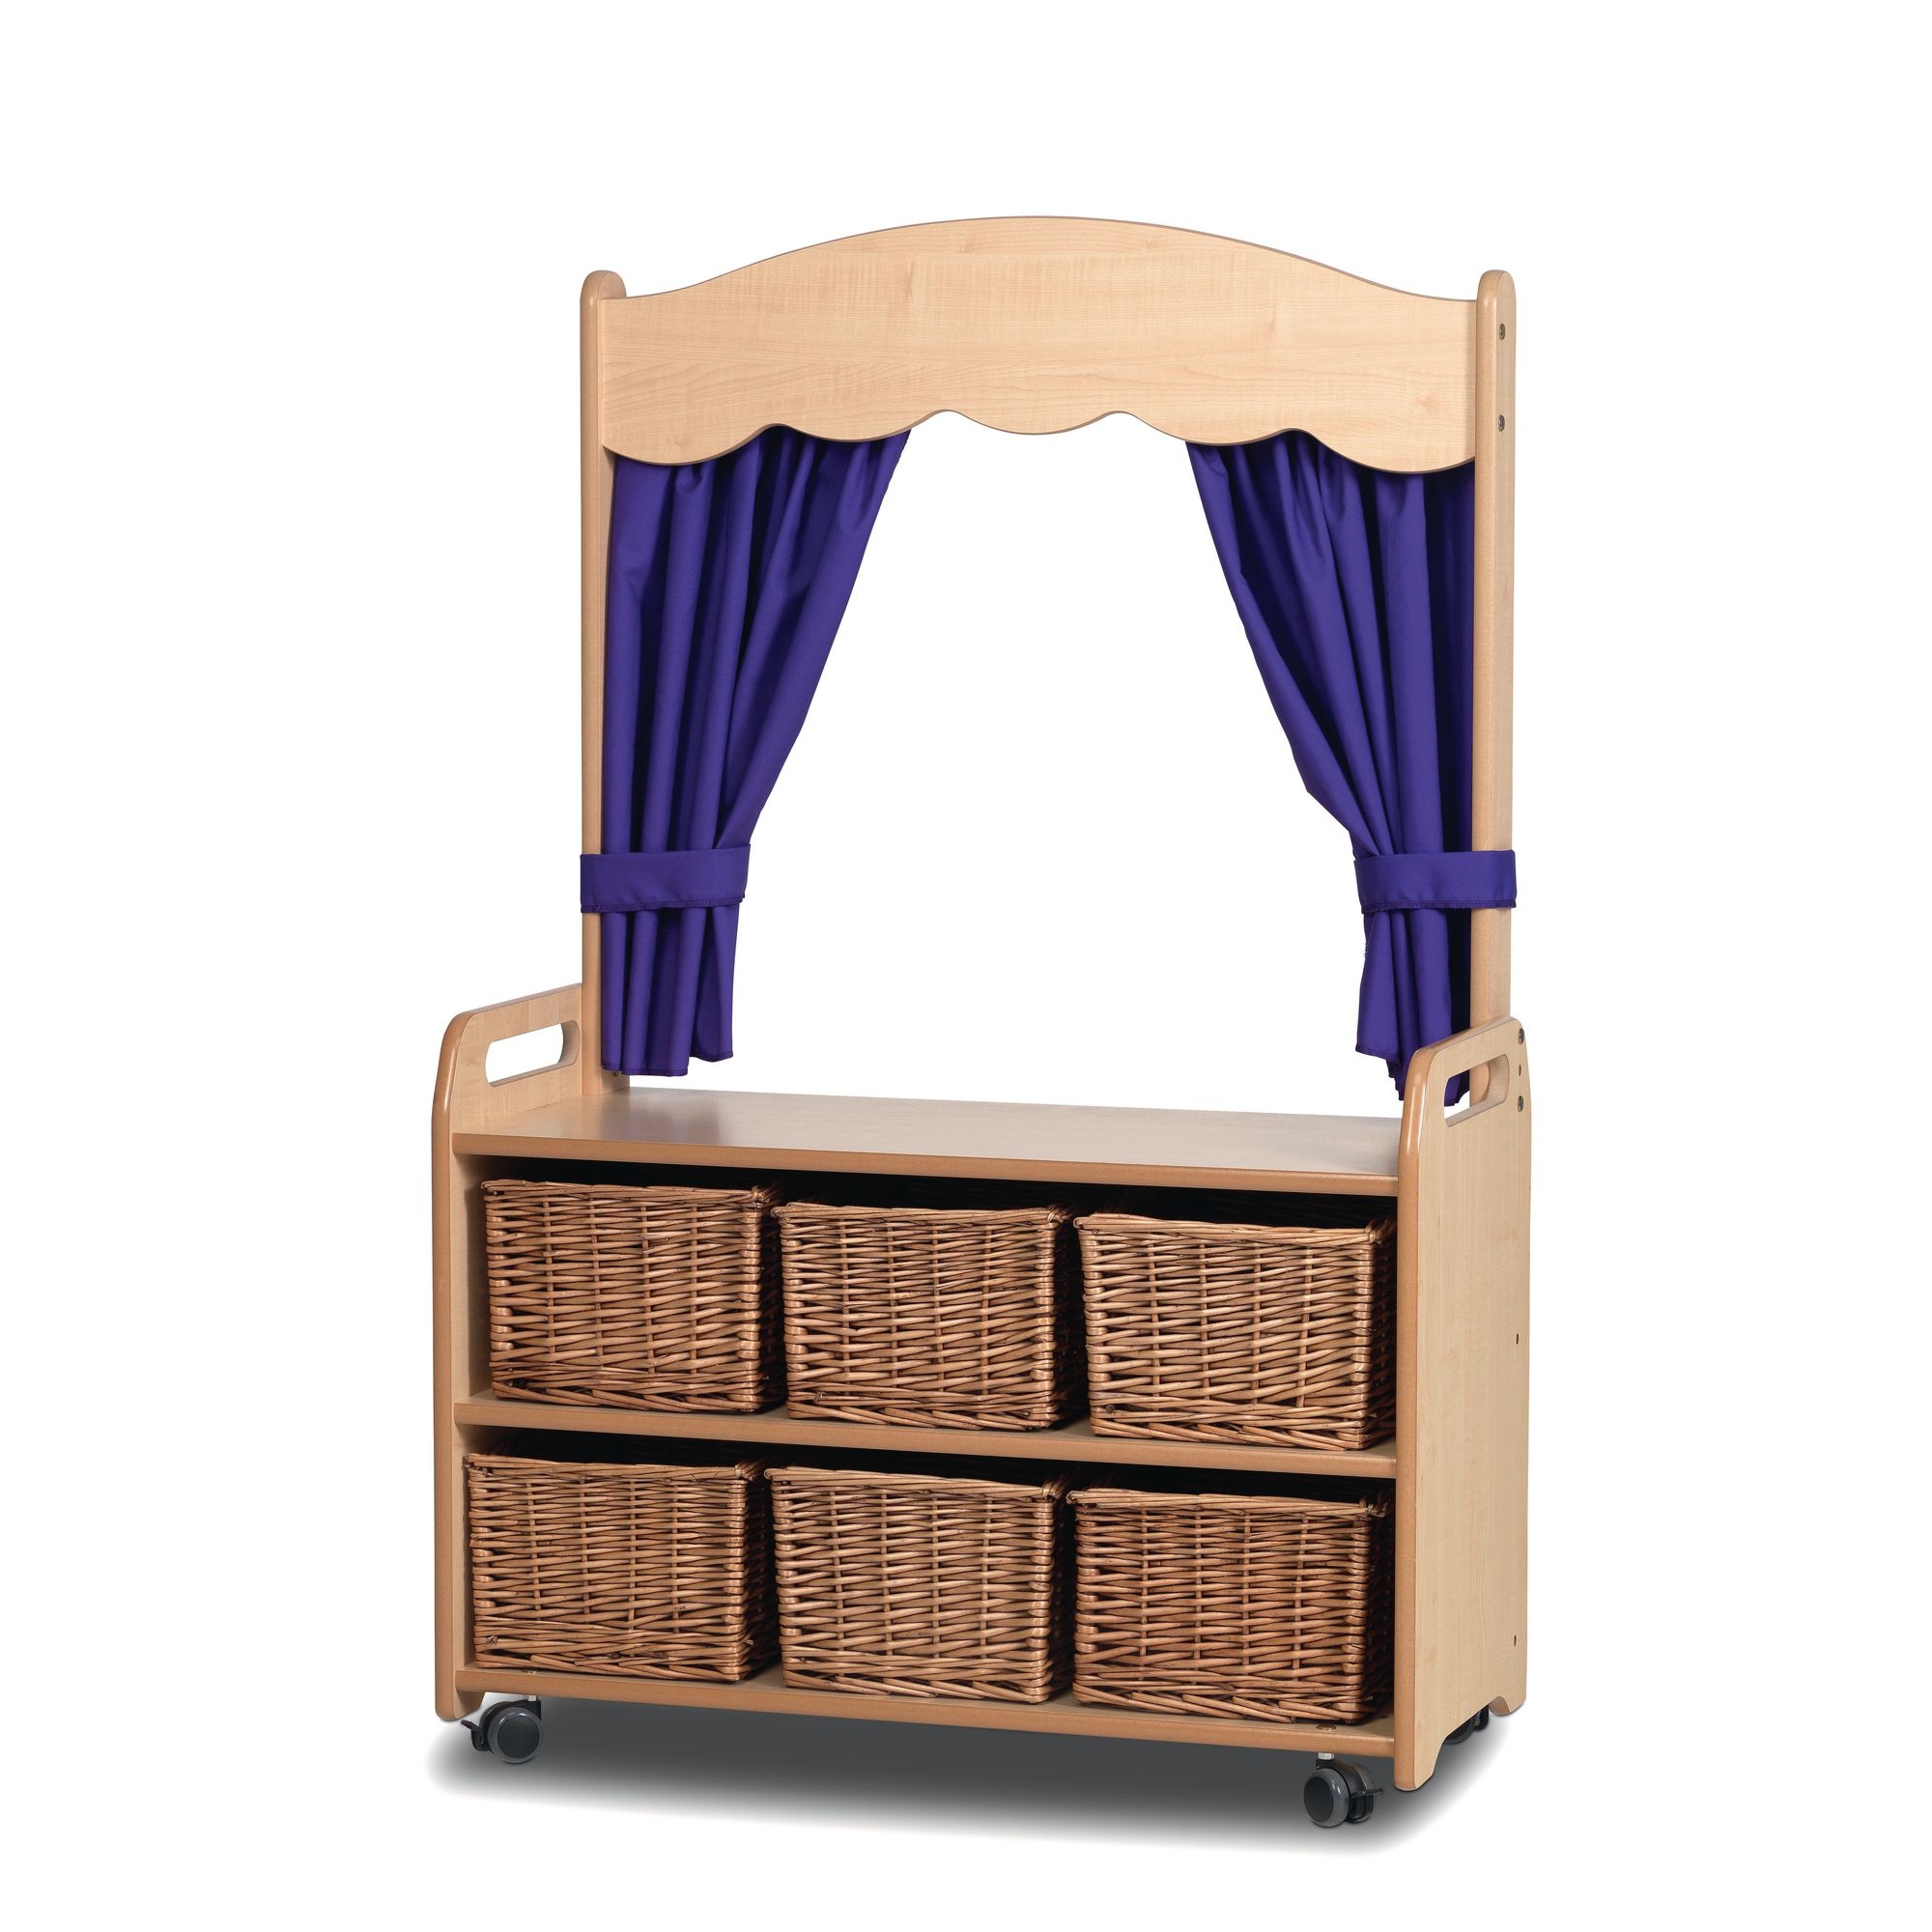 Playscapes Mobile Tall Unit Theatre 6 Wicker Basket